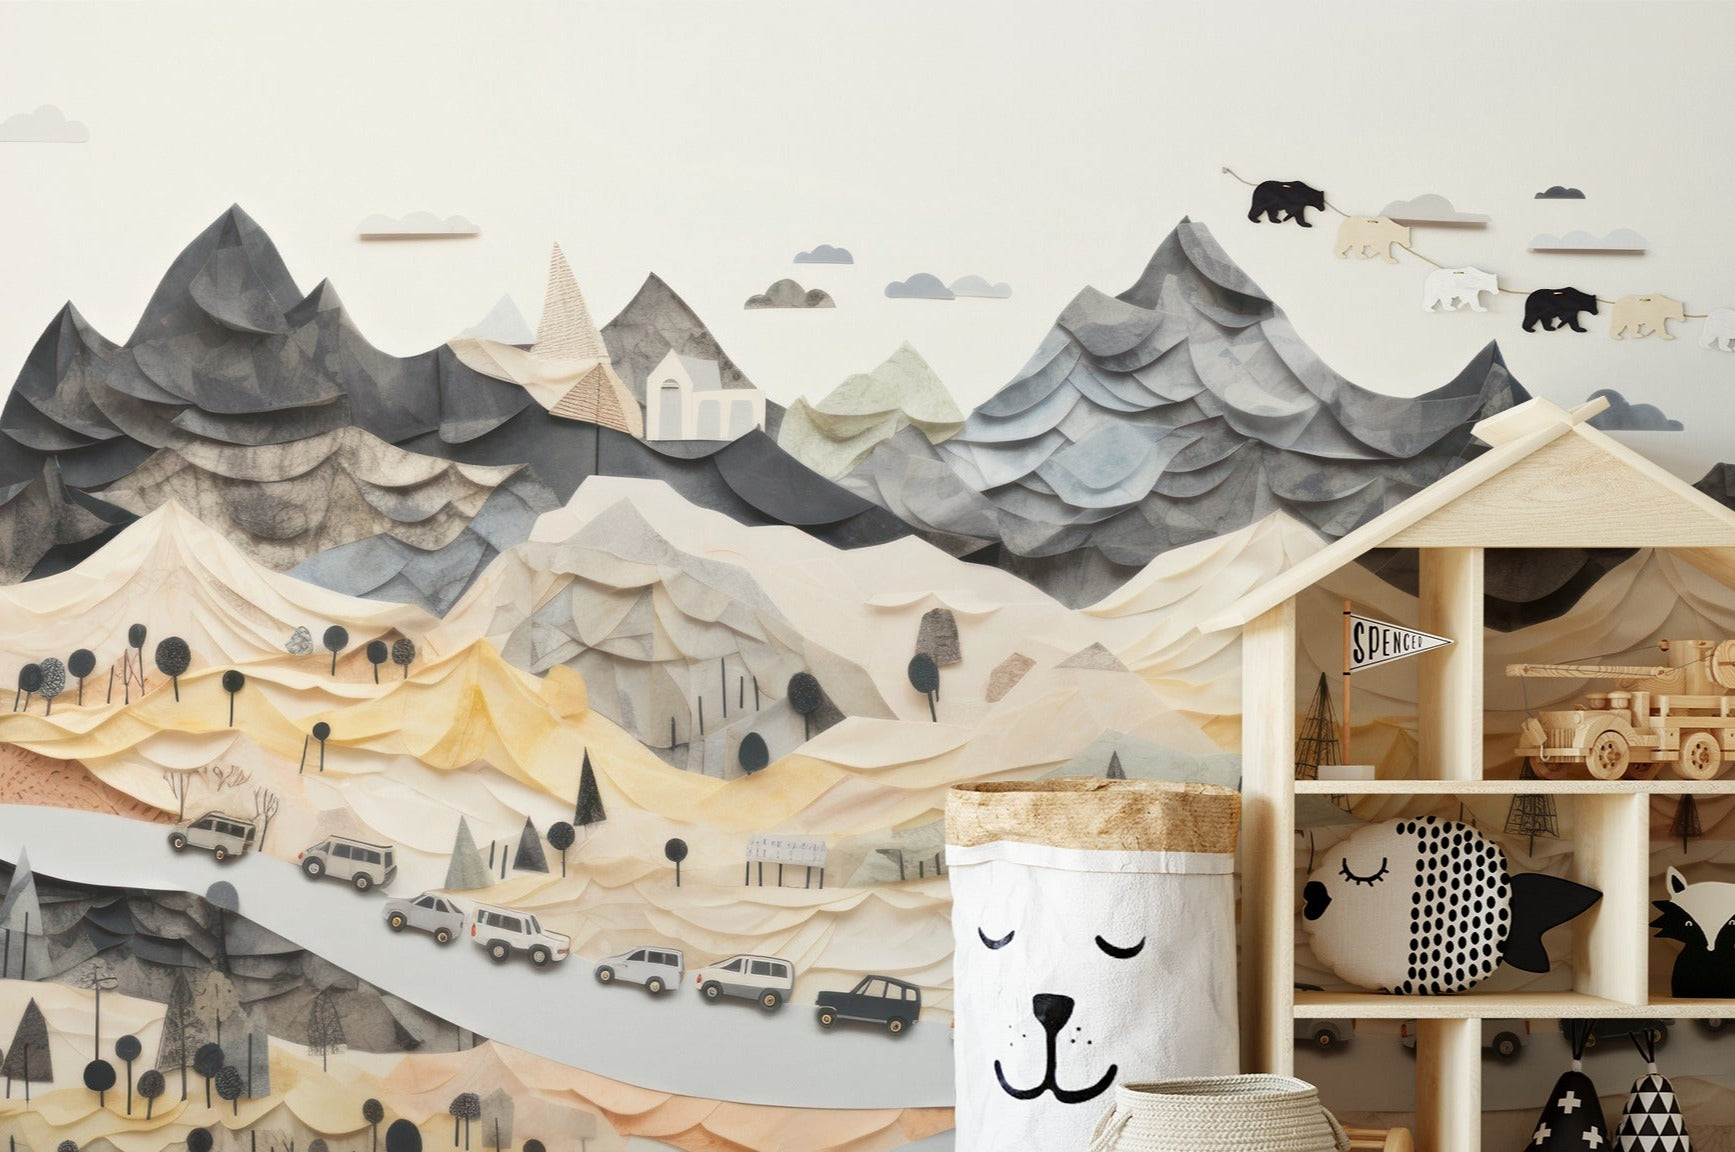 "Artistic Mountain Town Mural in Child's Playroom Featuring Wooden Toys and Neutral Decor"